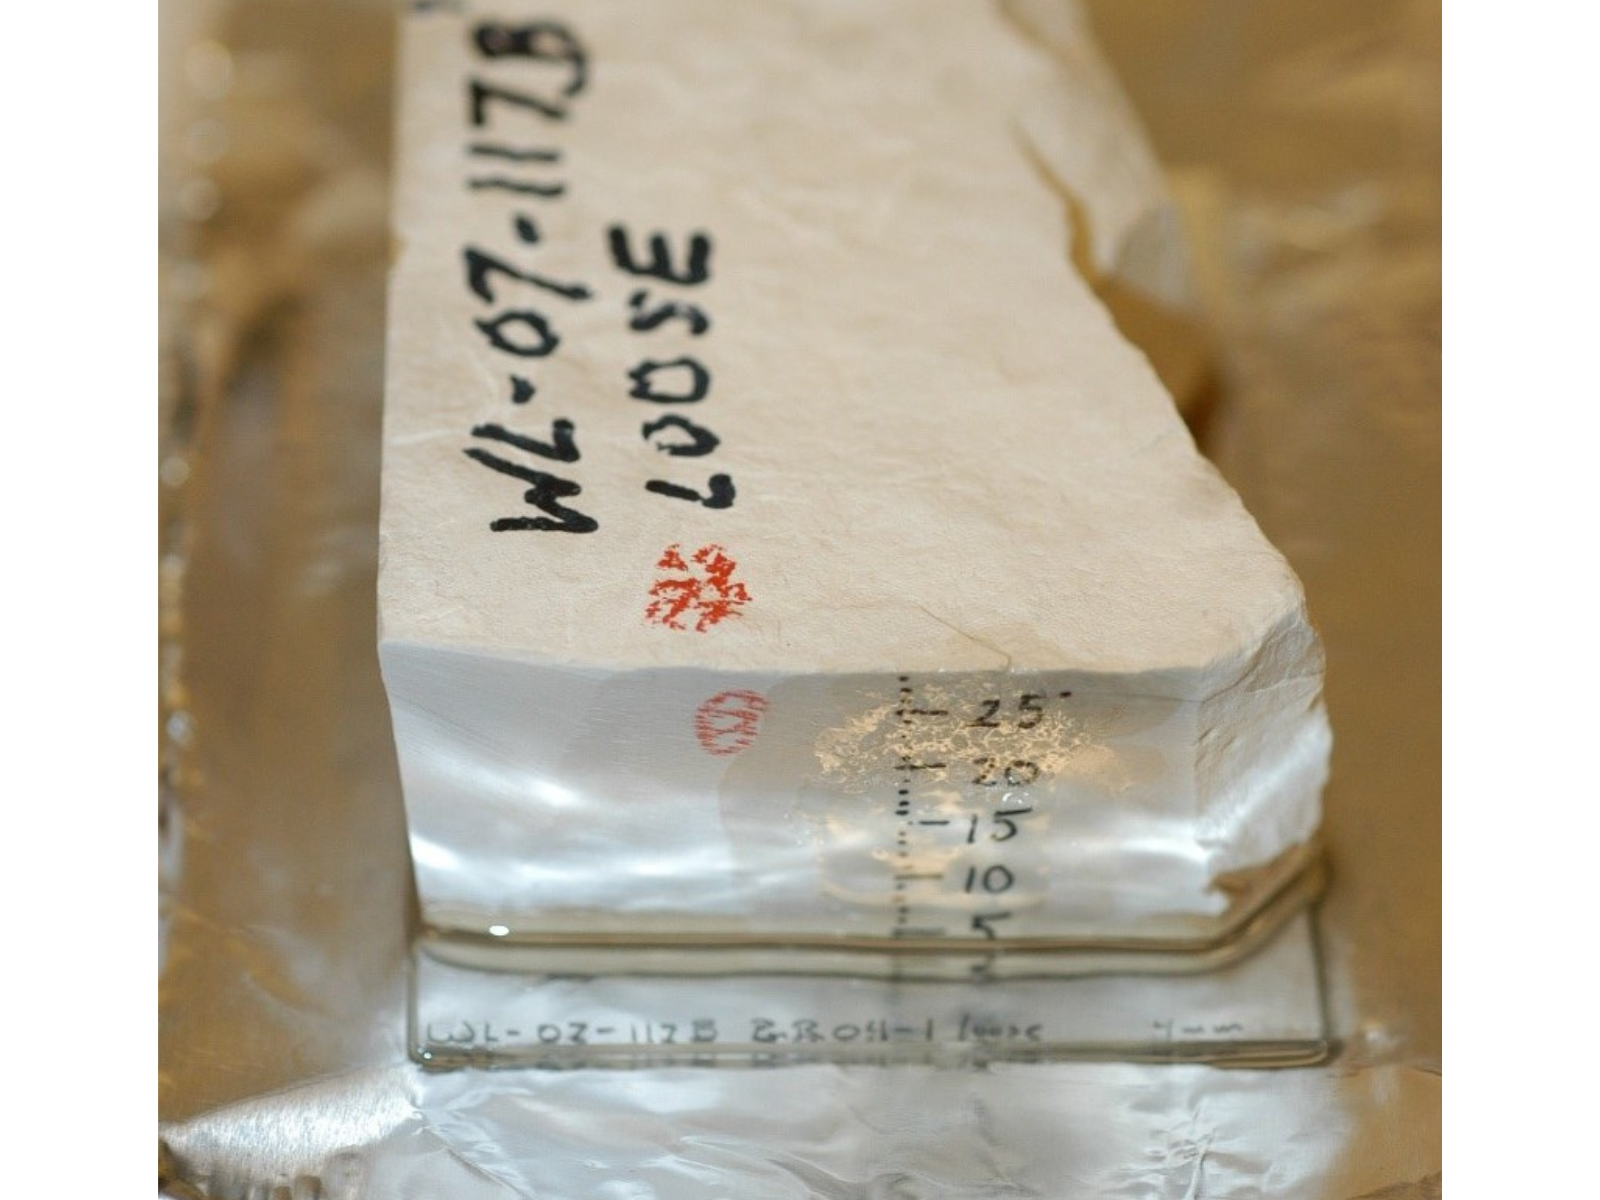 A polished white fossil block from the side. On the top surface a specimen number is handwritten in black. On the short side a size scale is written in place showing 5-25 mm in increments of five.